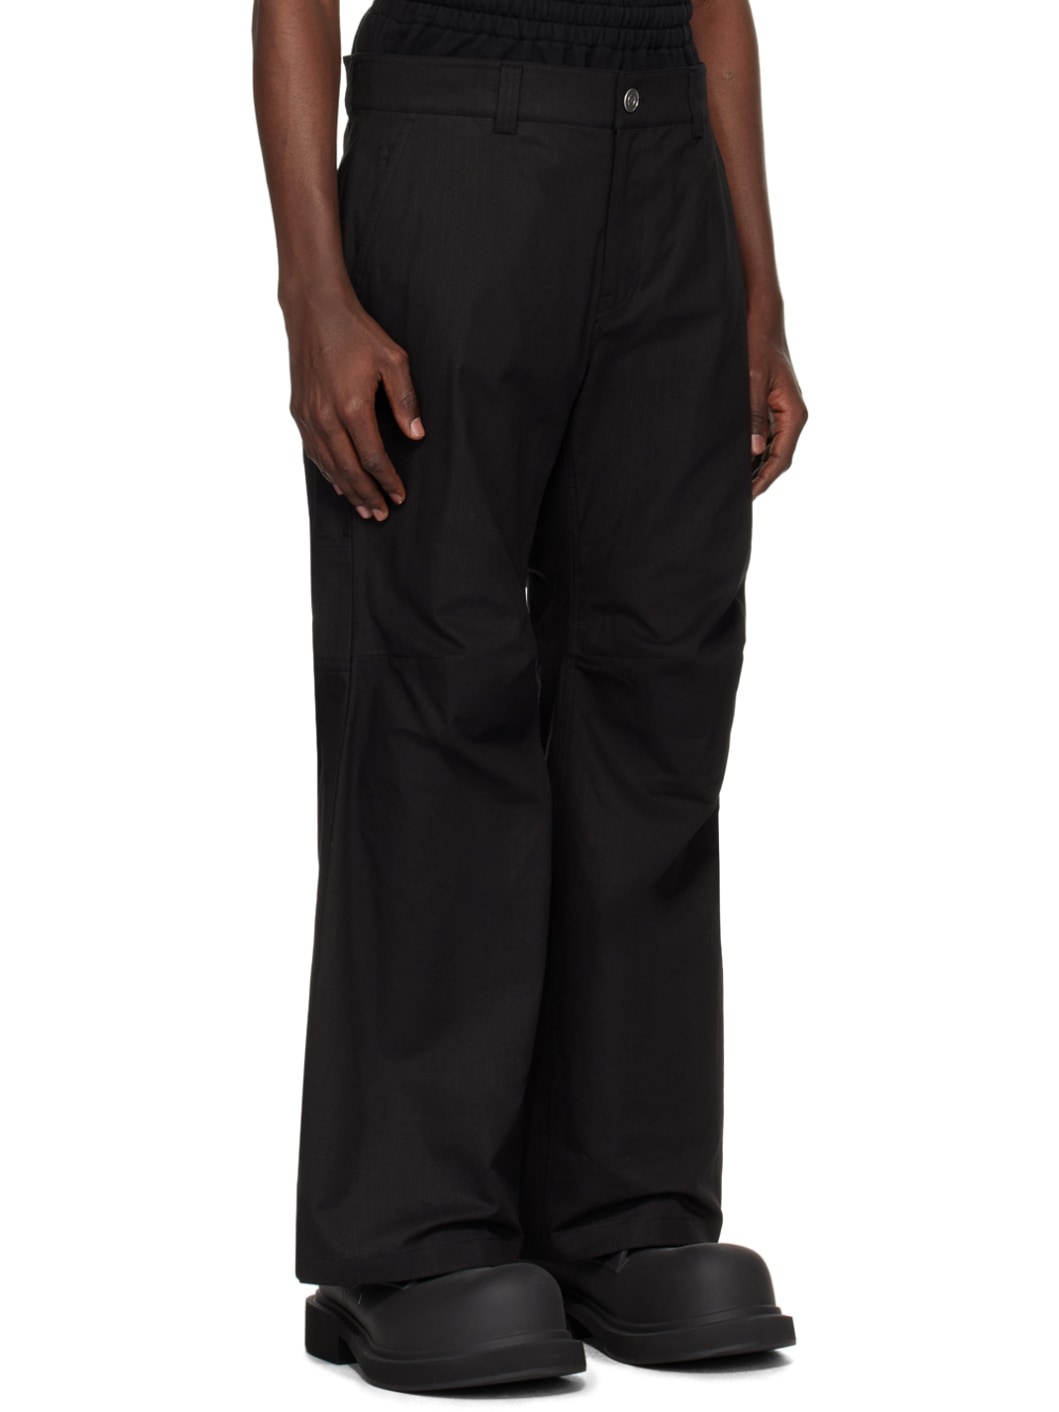 Black Layered Trousers - 2